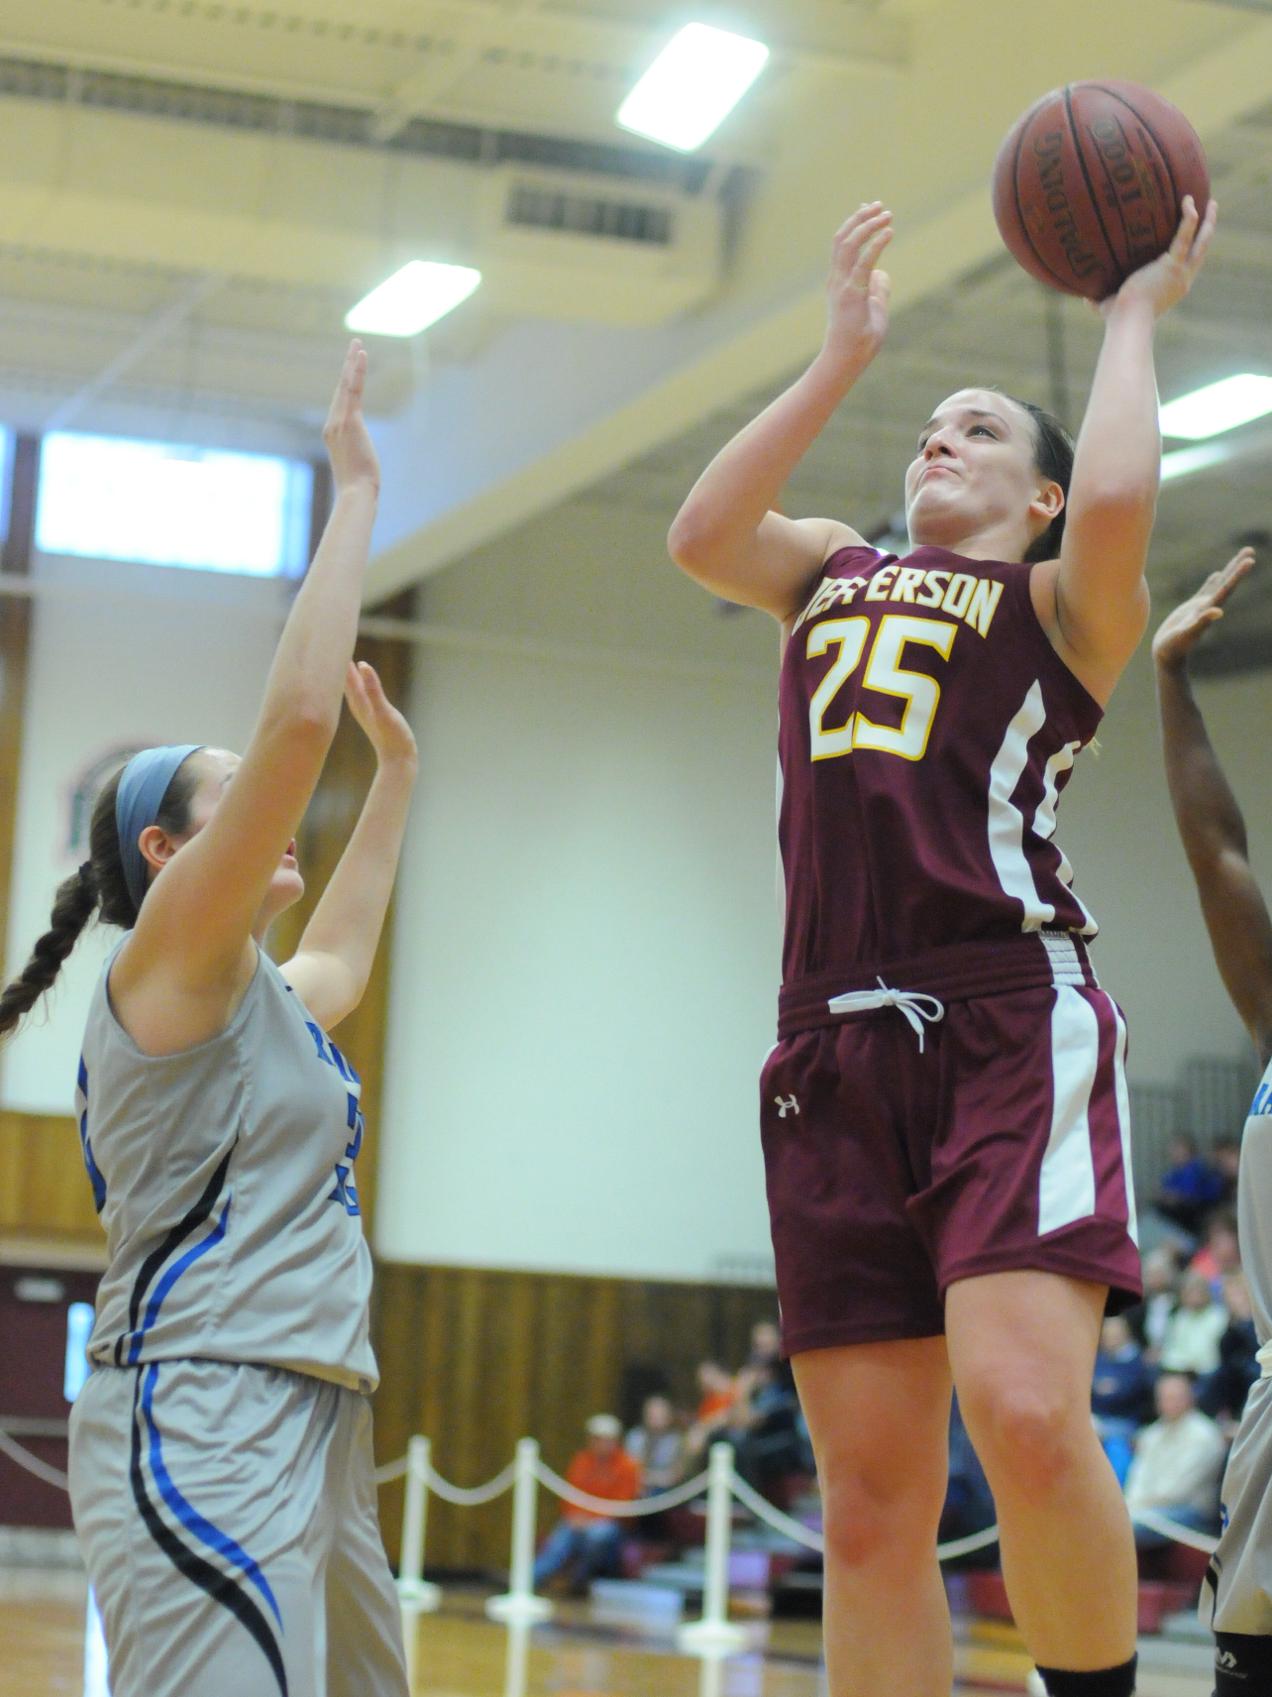 The Lady Cannoneers Win Against Schenectady, Fall to Fulton Montgomery